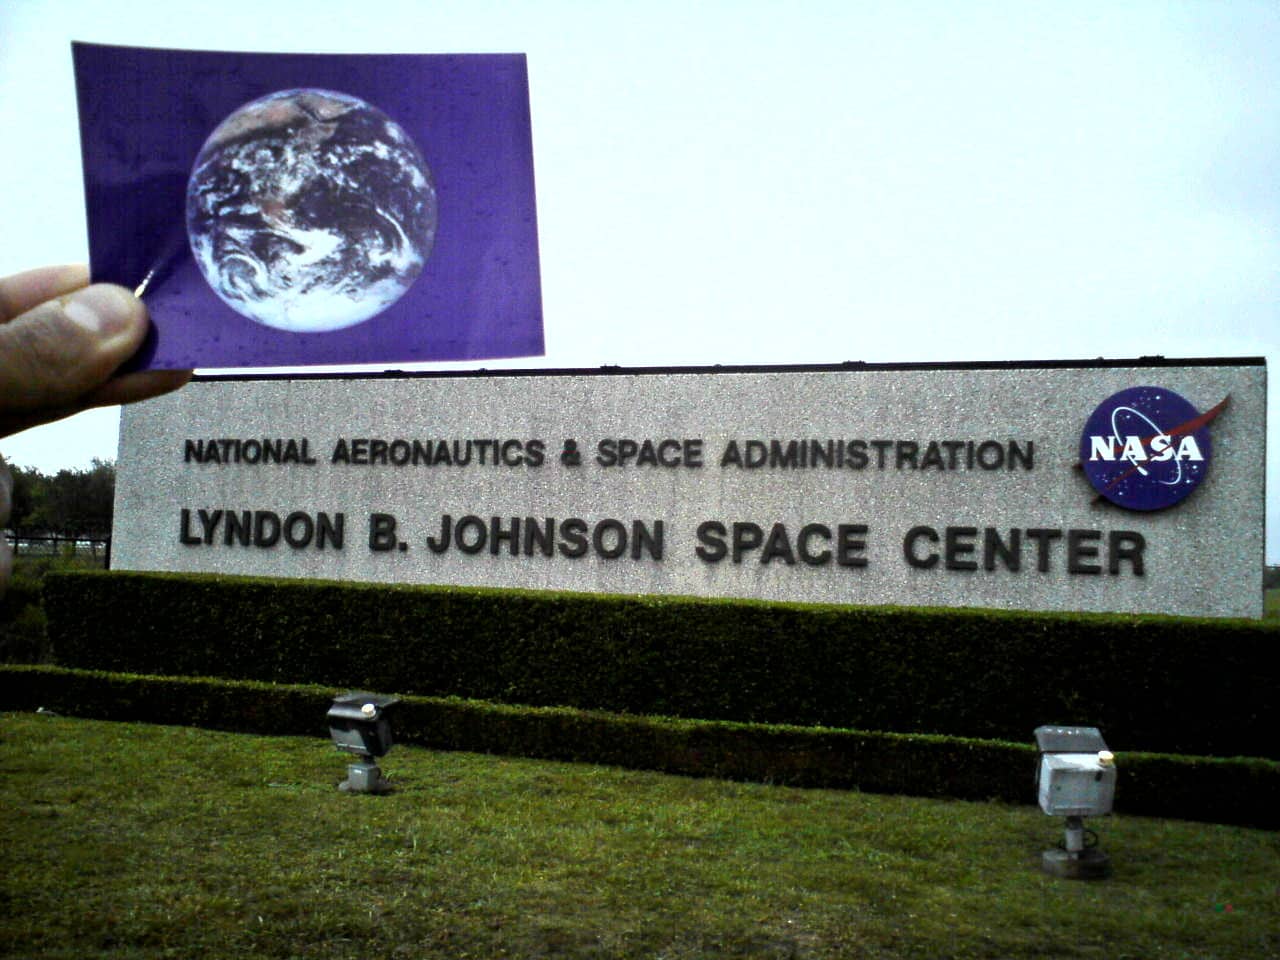 Johnson’s Space Center was #EarthFlagged !